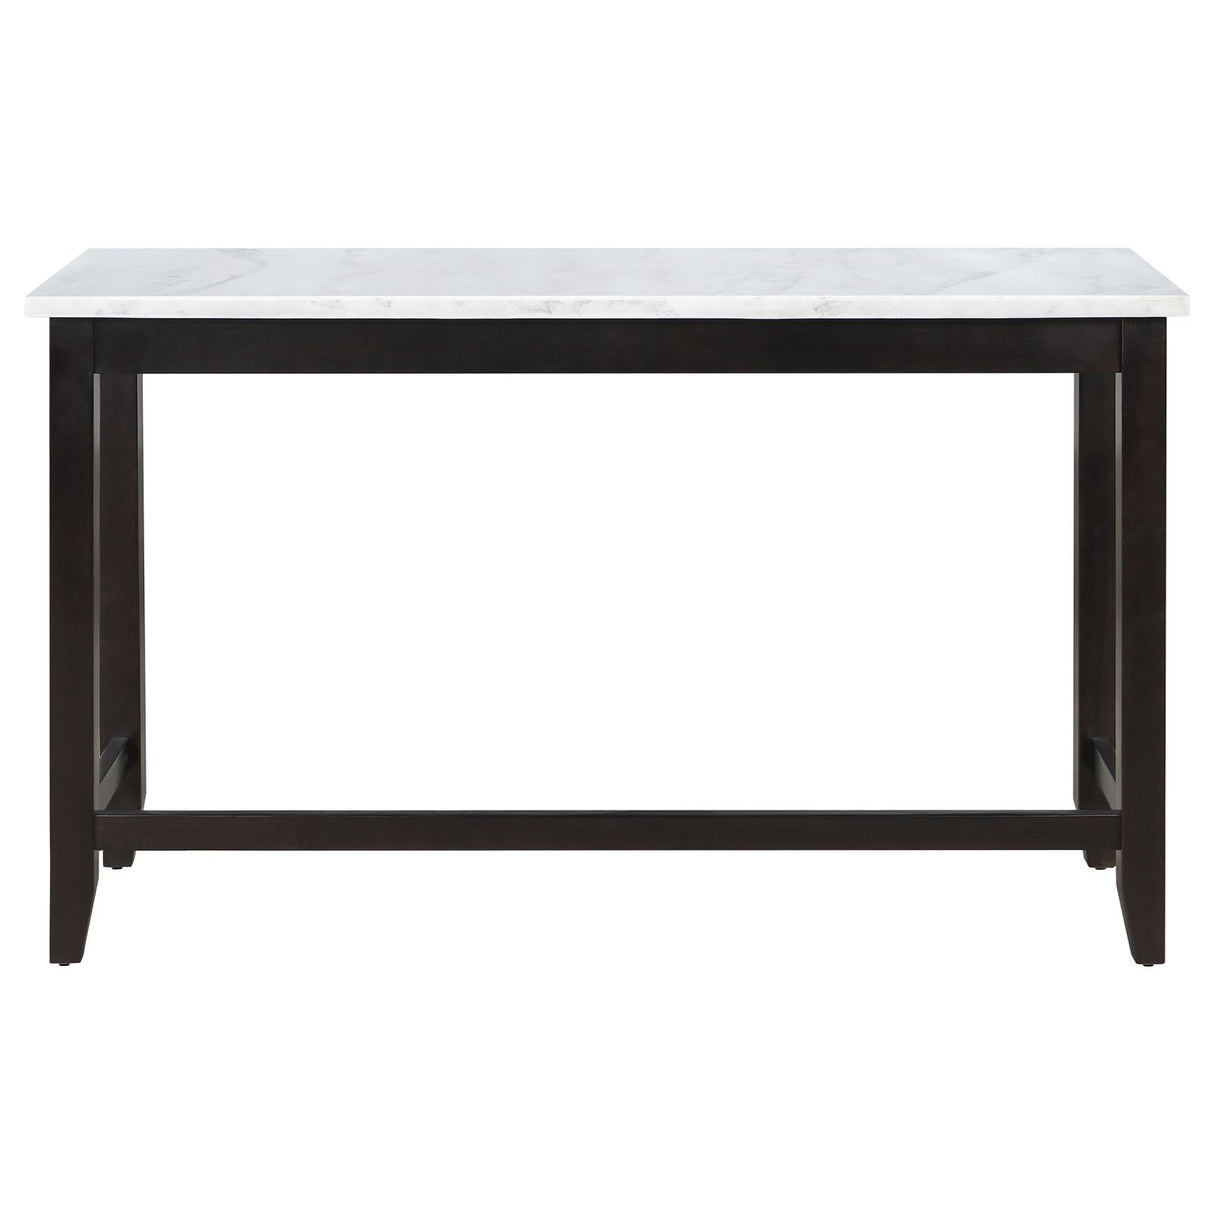 Toby Rectangular Marble Top Counter Height Table Espresso and White - 115528 - Luna Furniture